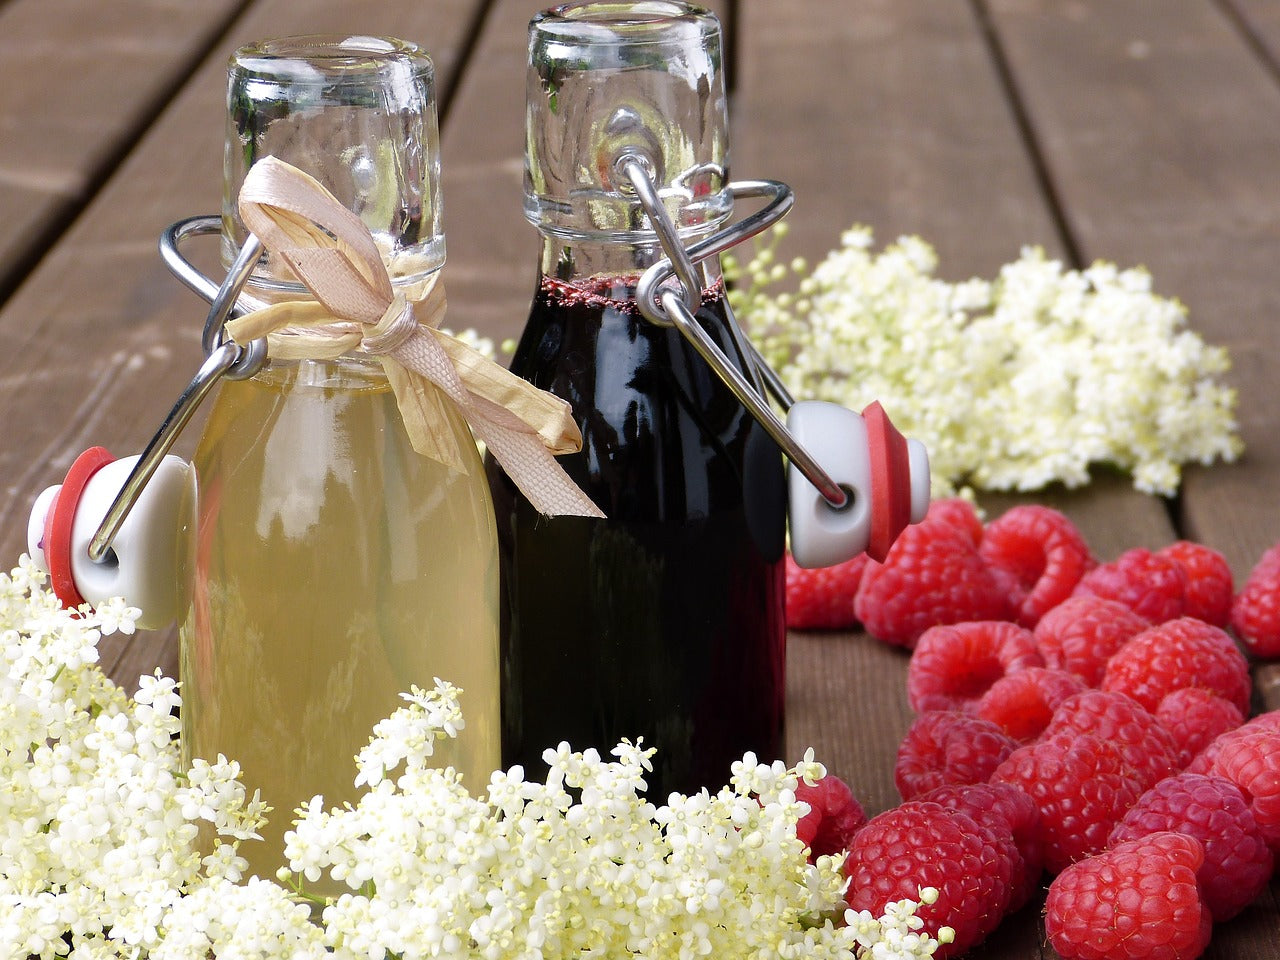 Elderberry Syrup - What's the Big Deal?